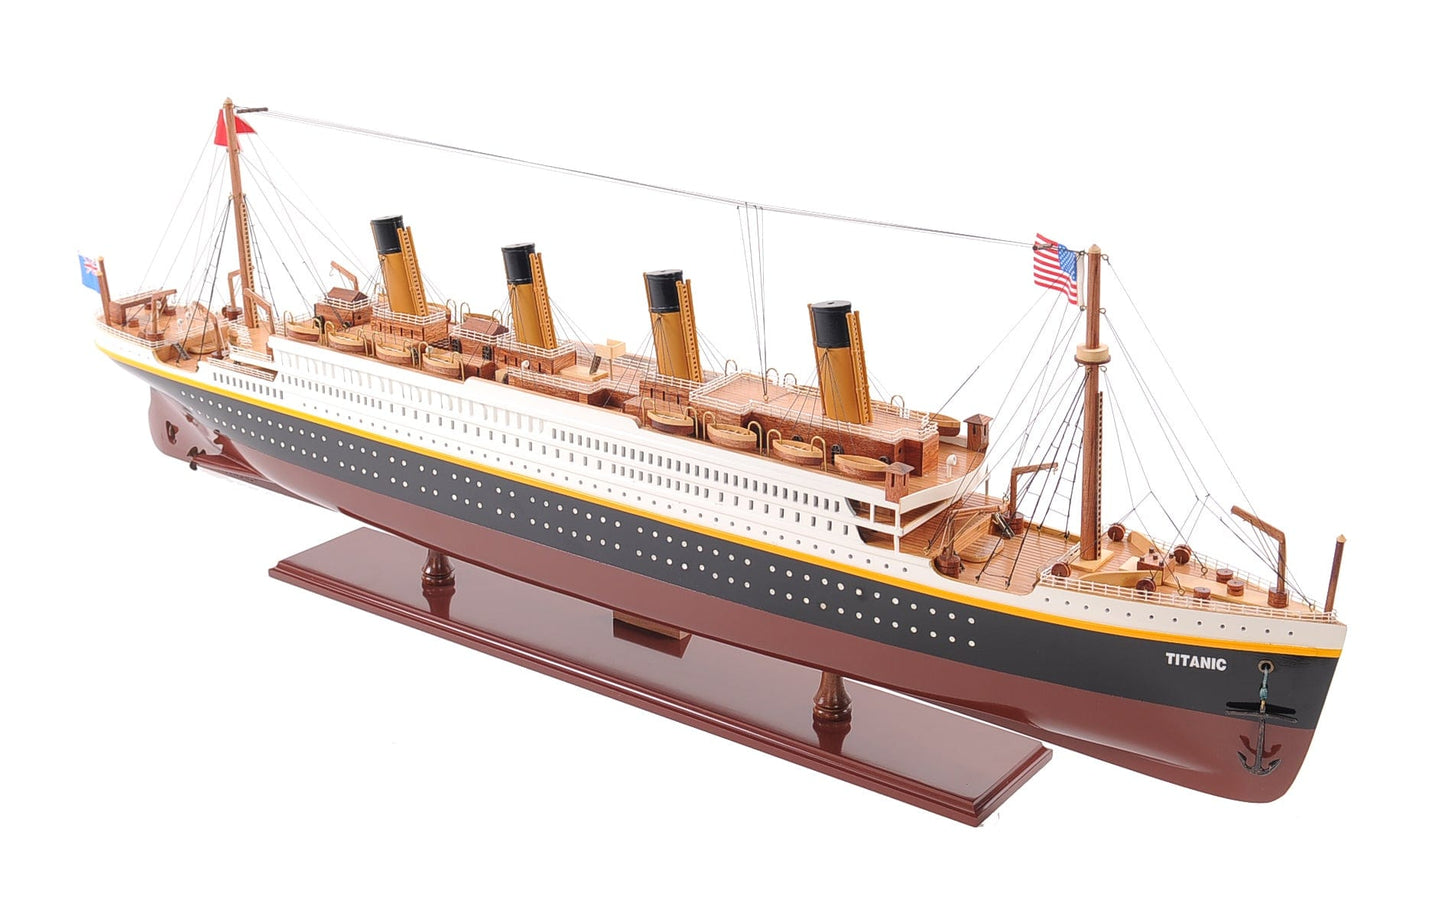 ALDO Hobbies & Creative Arts> Collectibles> Scale Model L: 40 W: 4.5 H: 14 Inches / NEW / Wood RMS Titanic Painted Large Passenger Ship Ocean Liner Wood Model Assembled